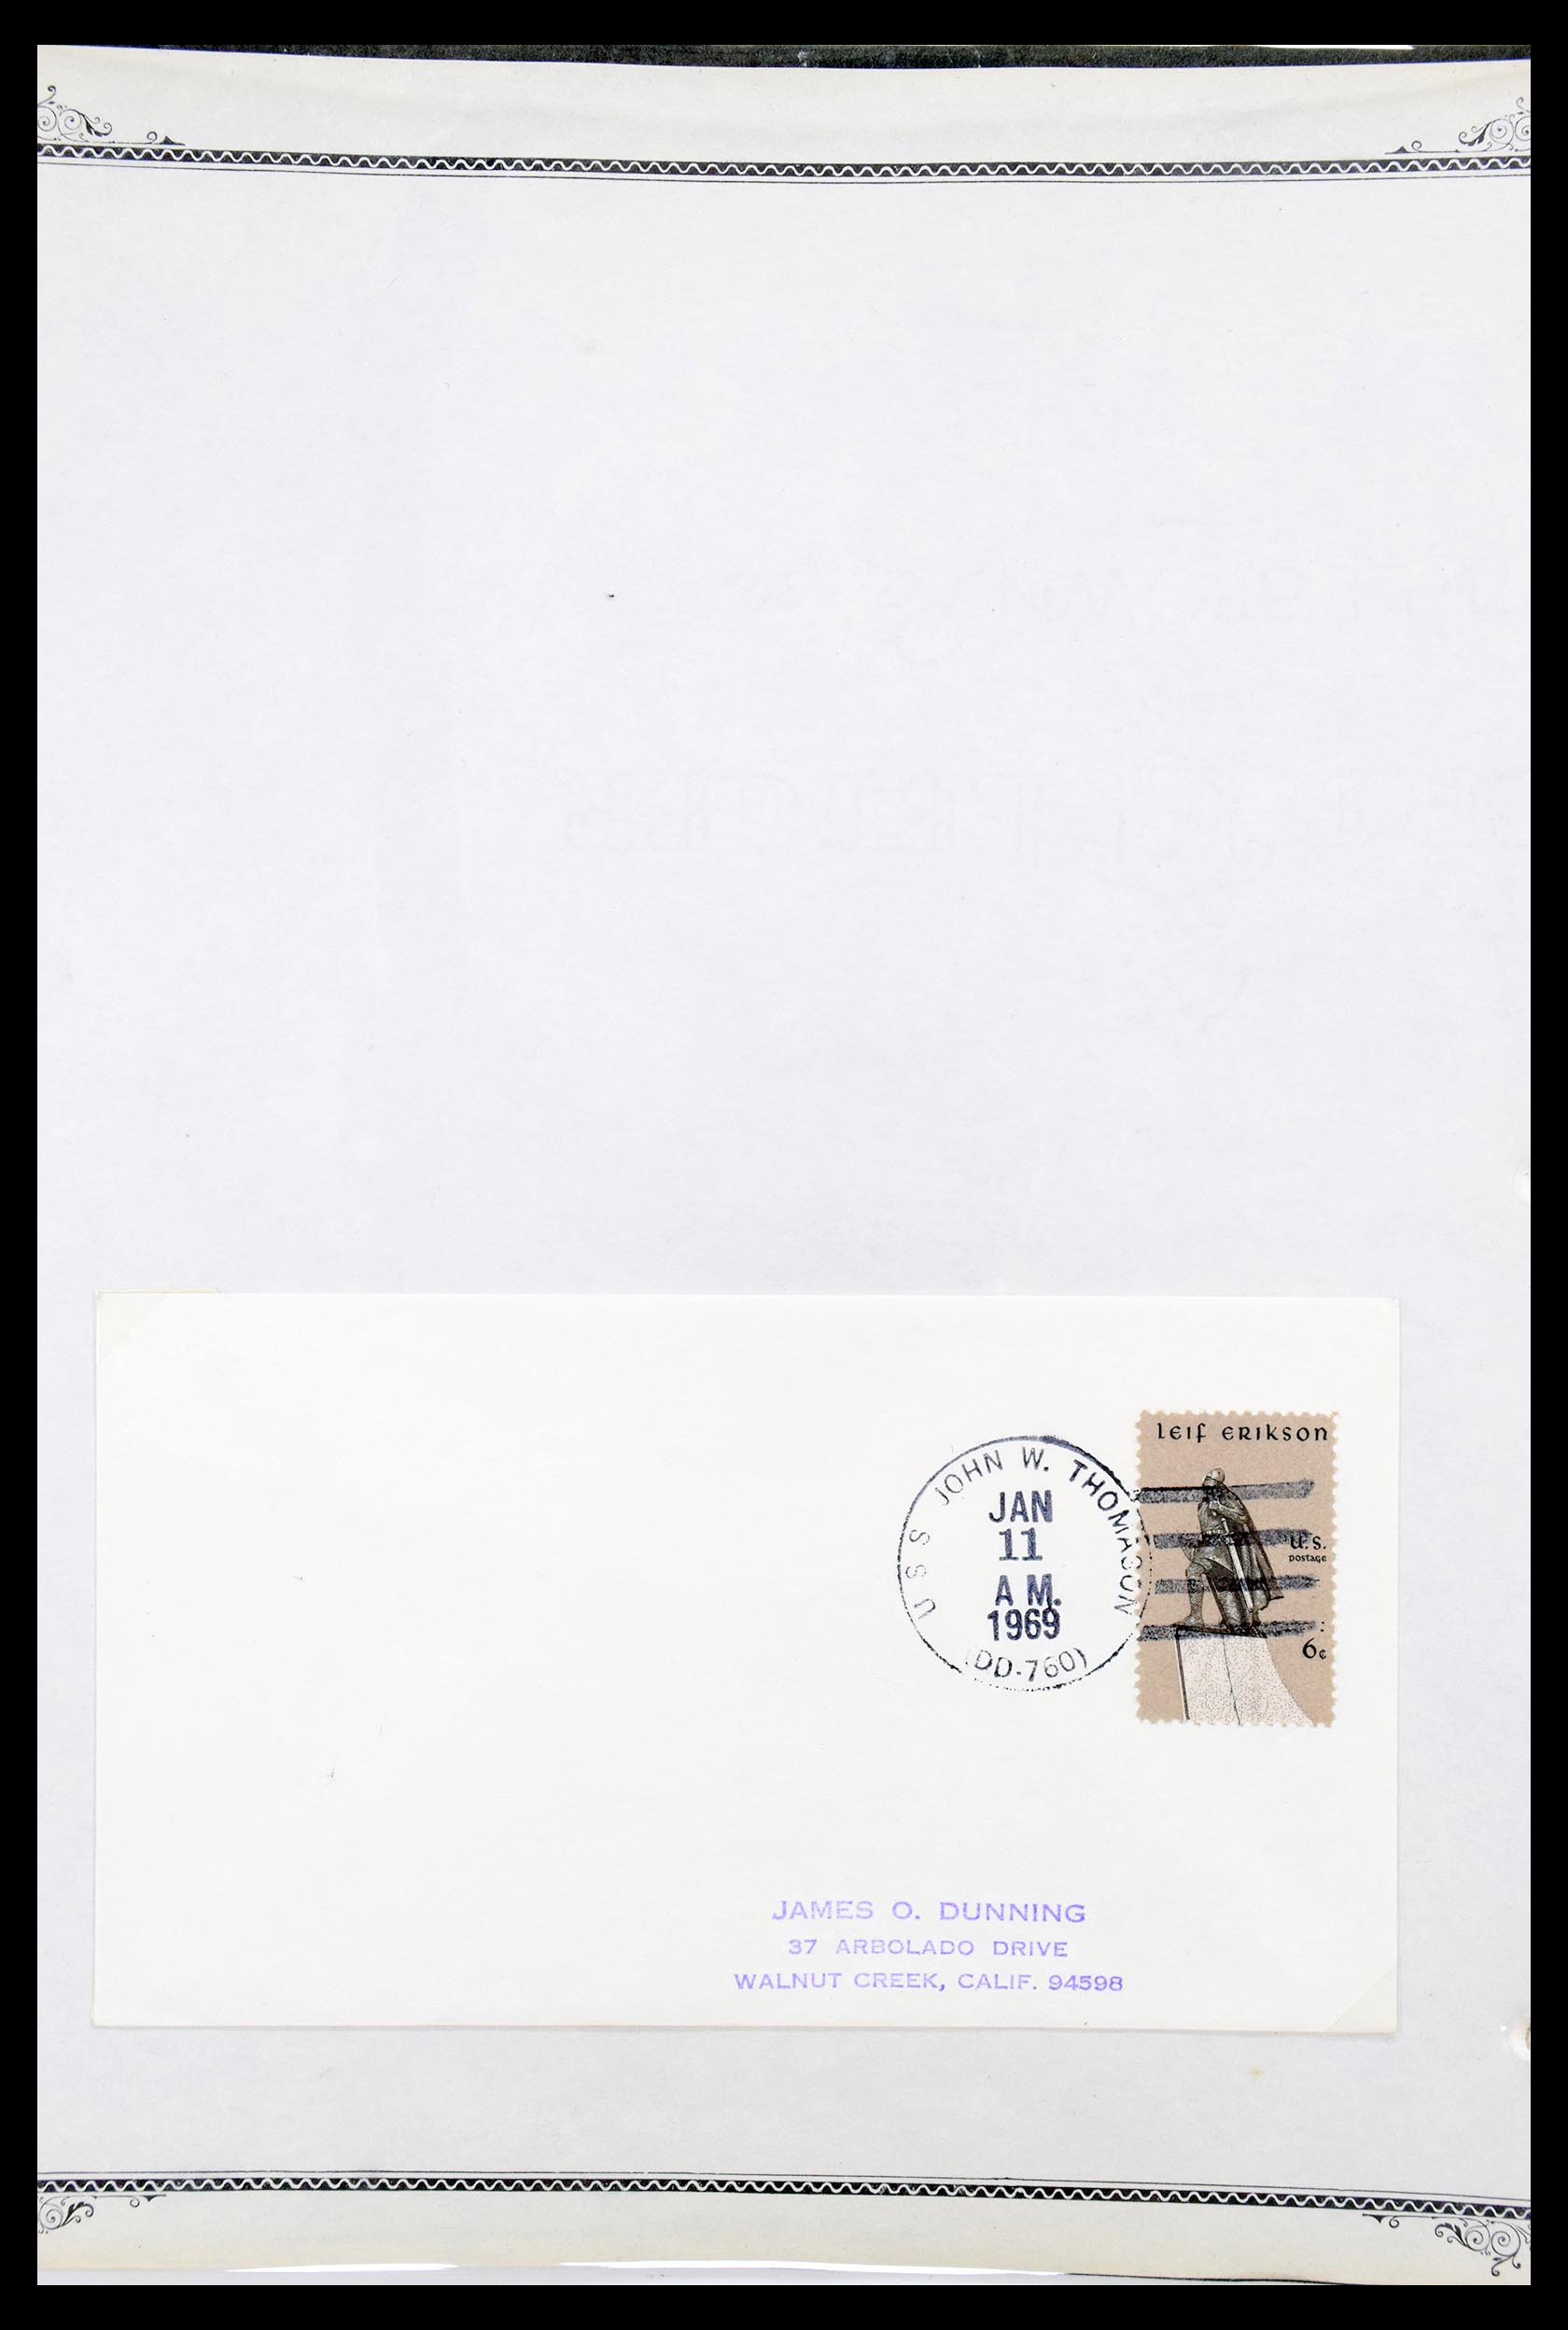 30341 036 - 30341 USA naval cover collection 1930-1970.